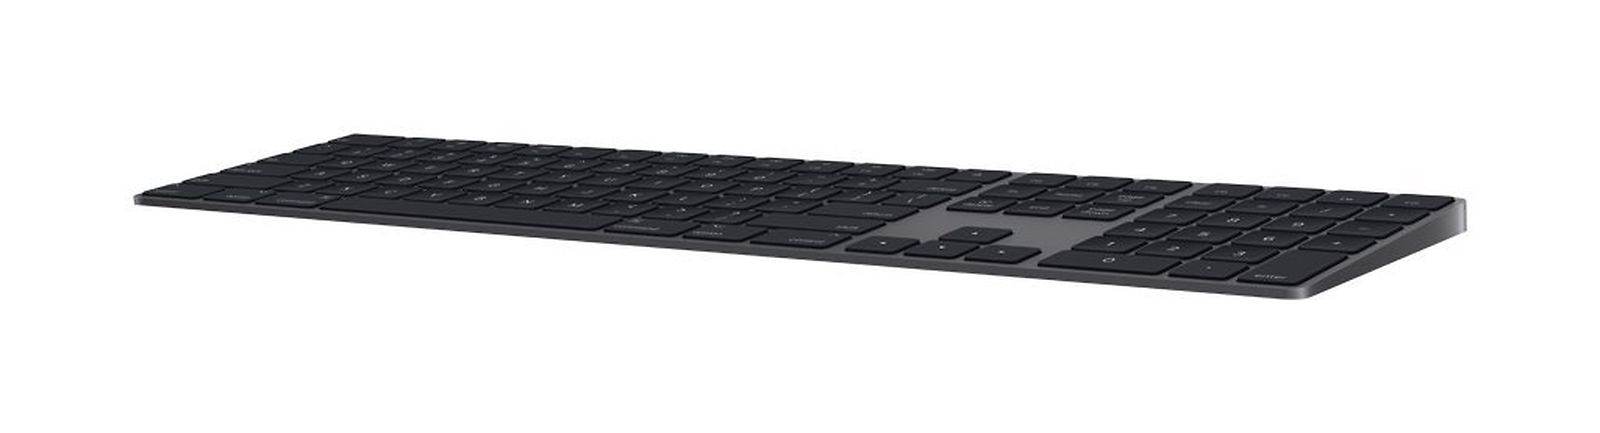 apple magic keyboard with numeric keypad space gray